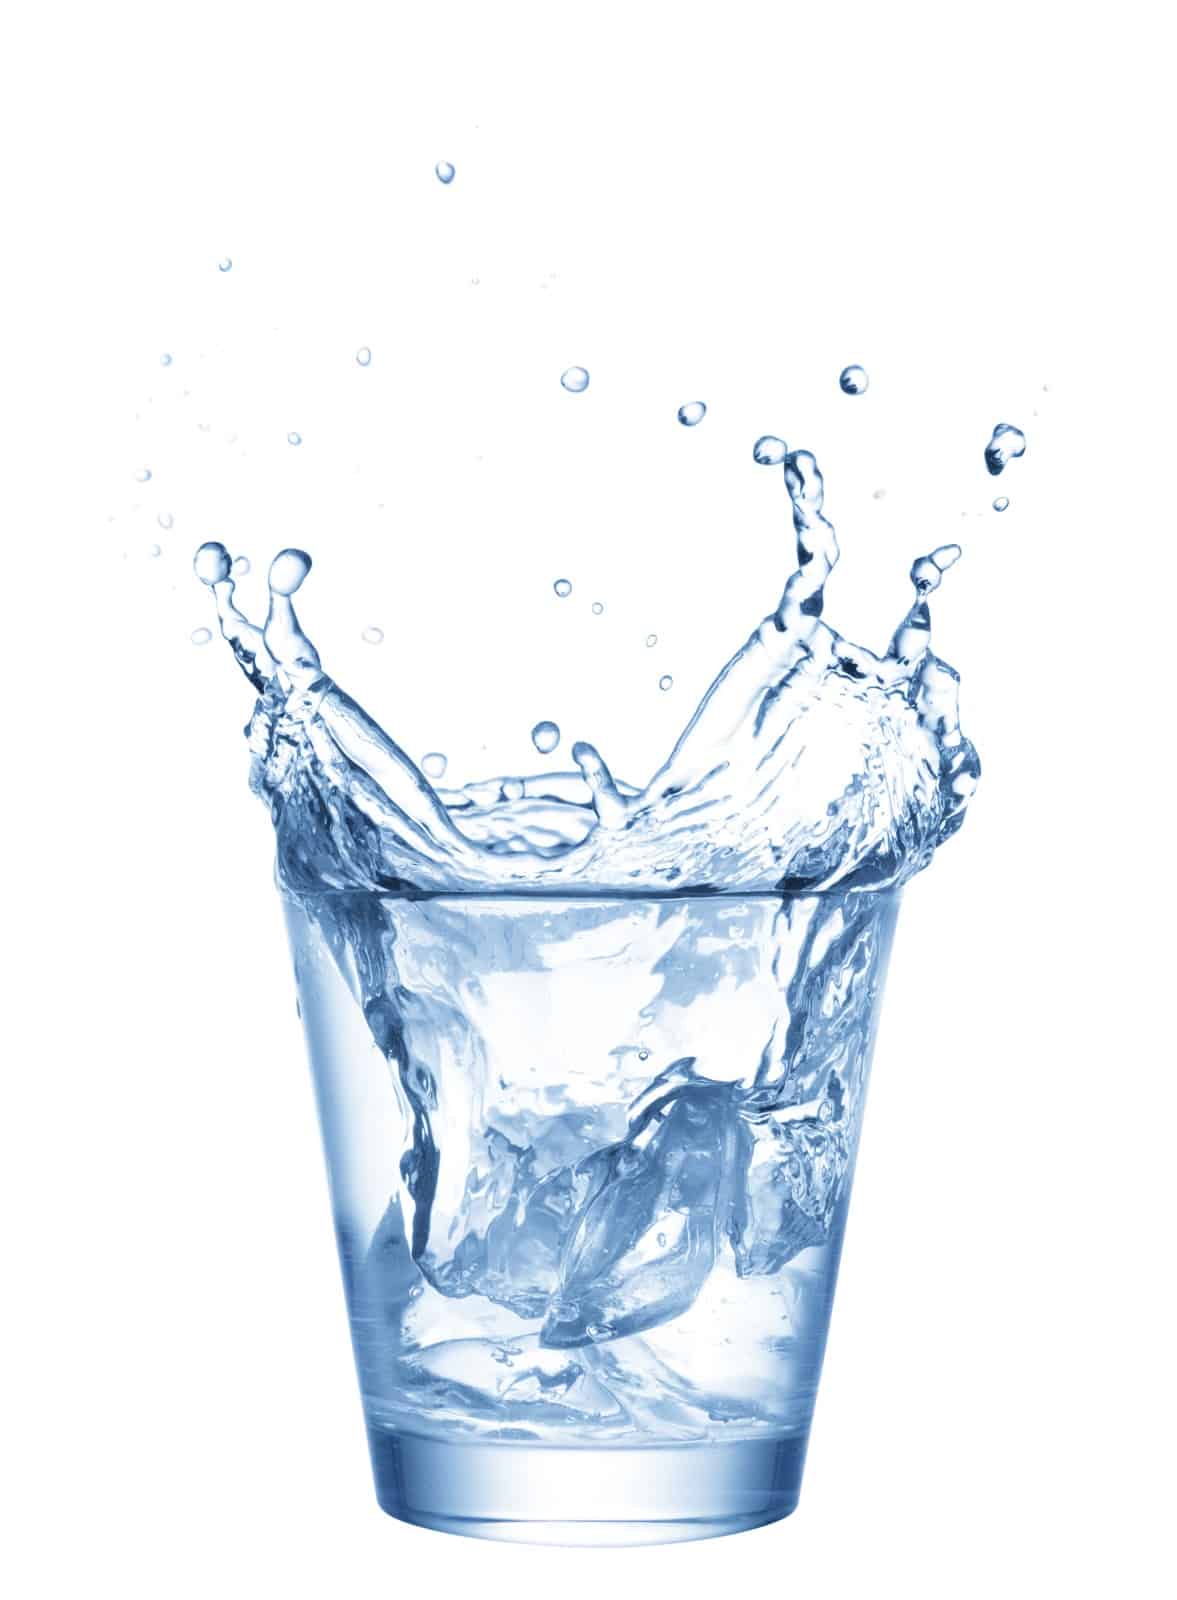 1359215162_glass-of-water1